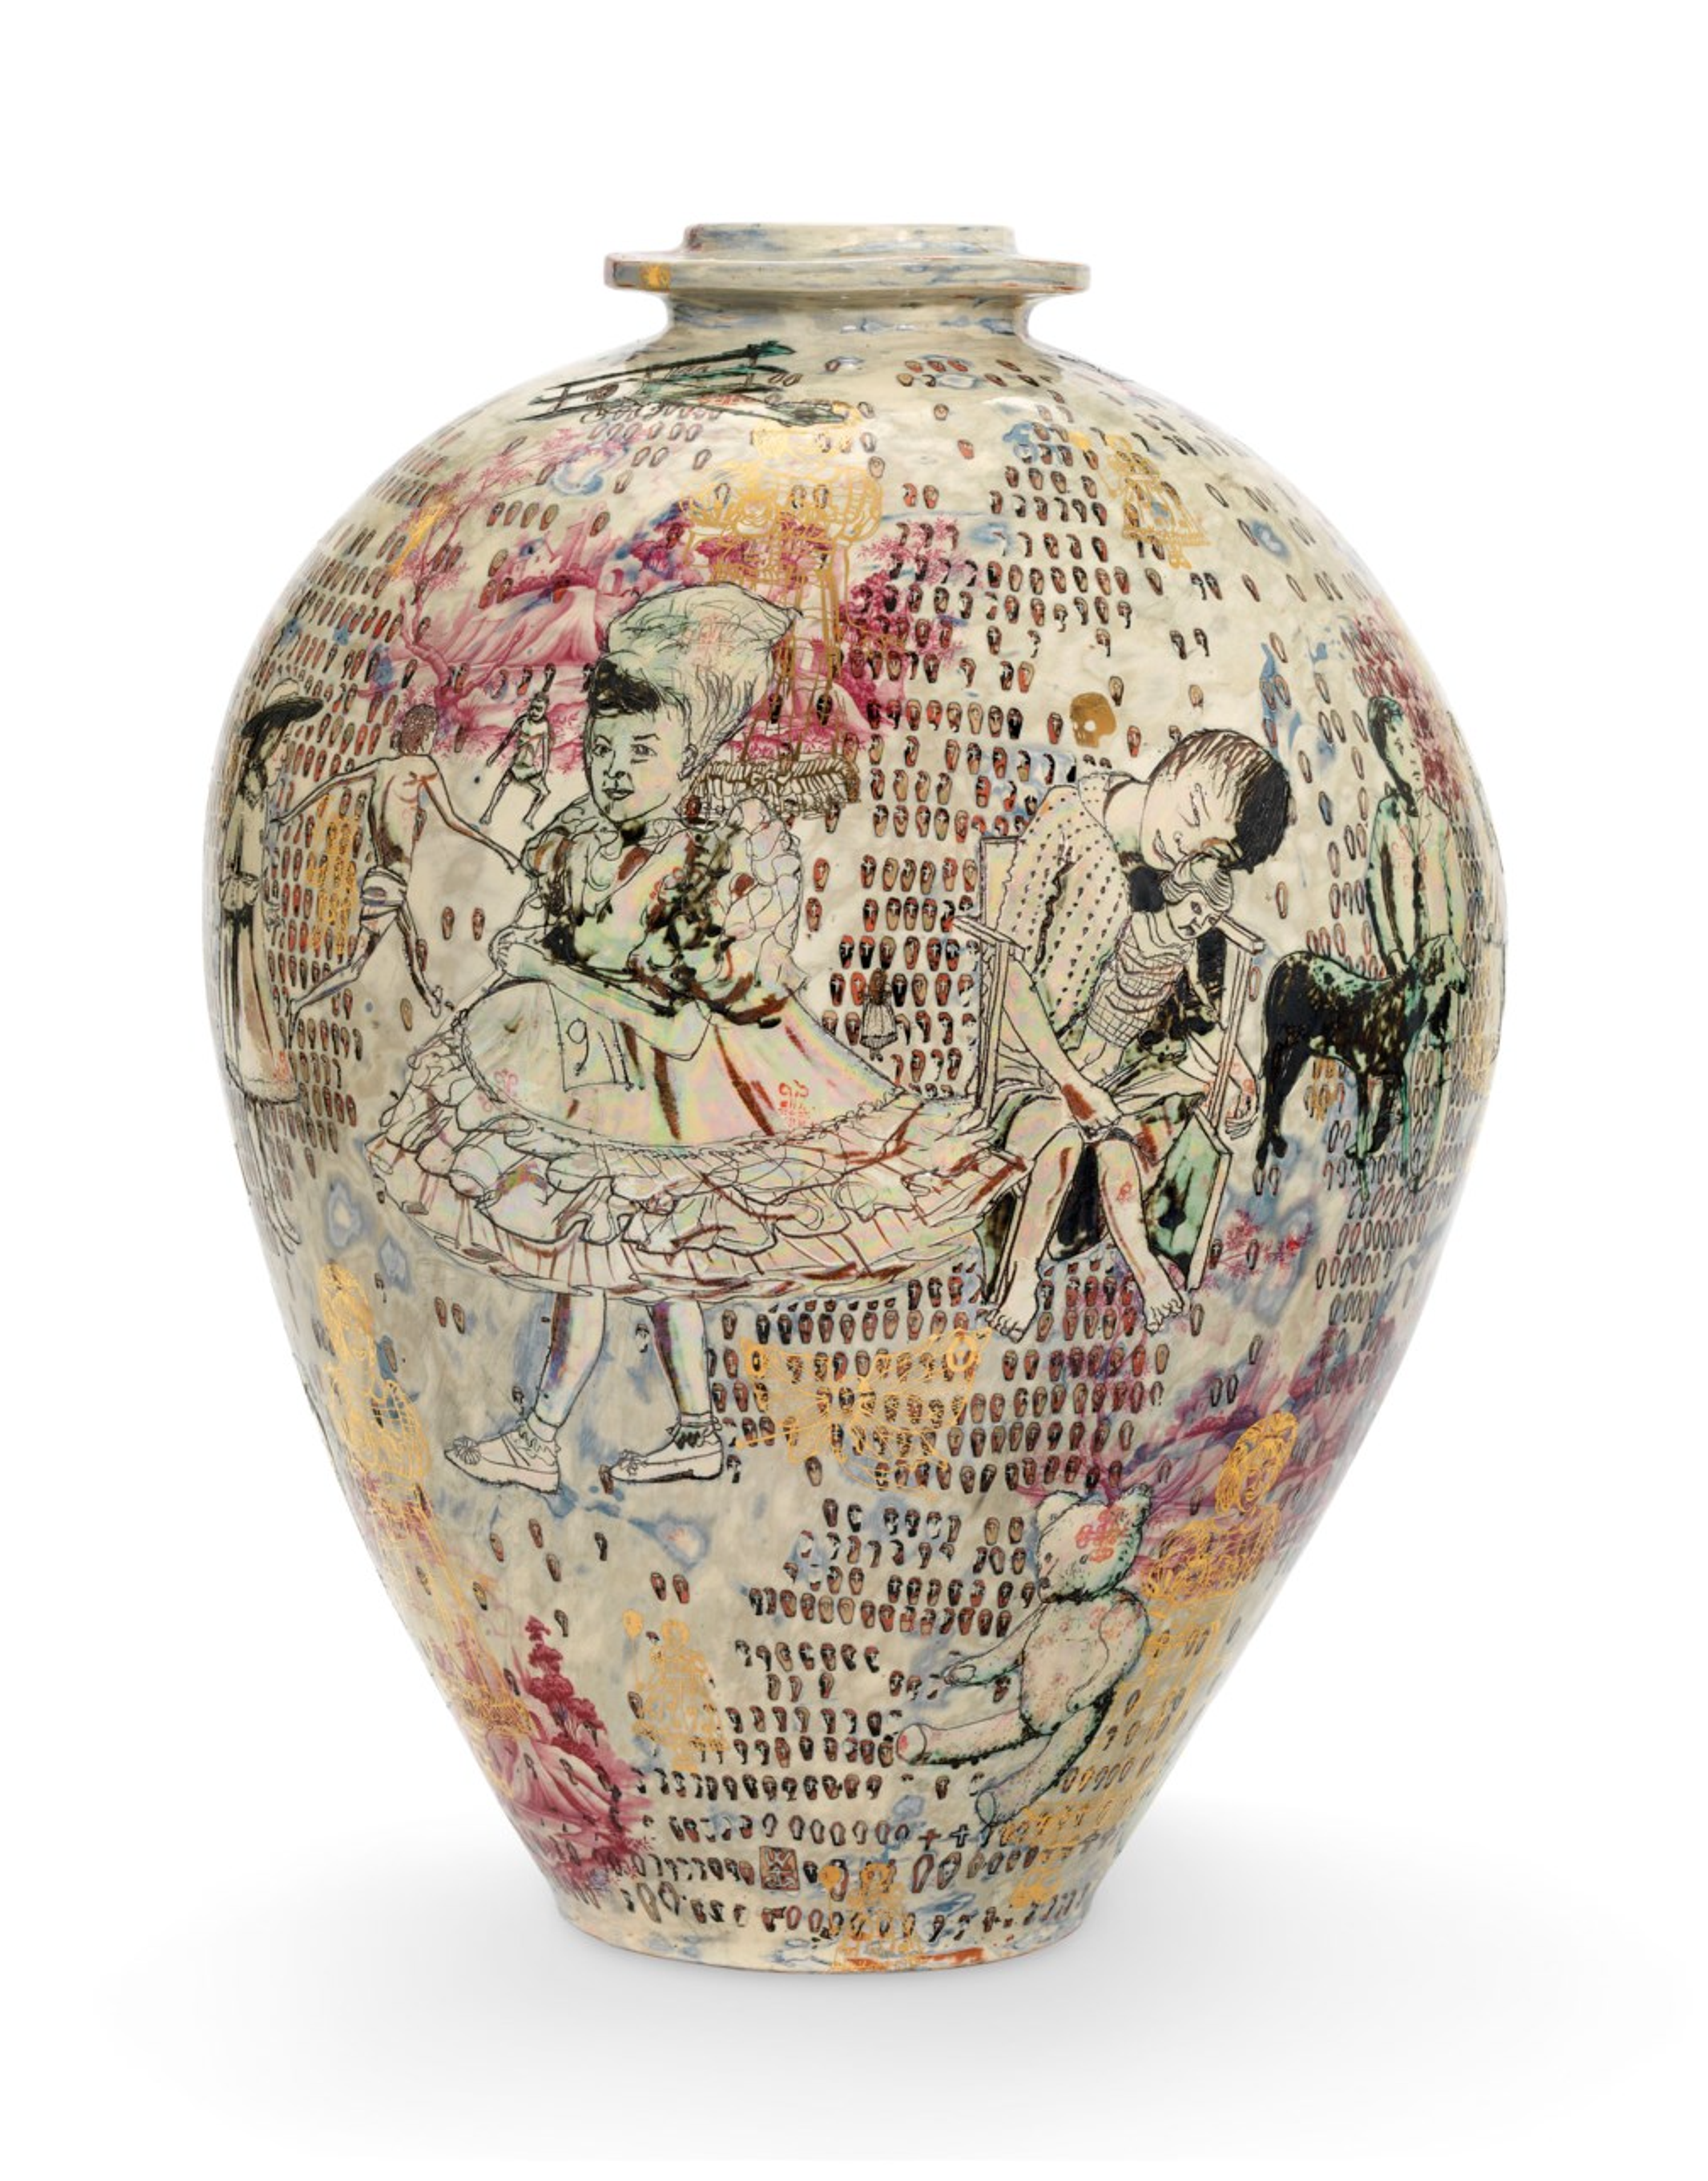 Glazed earthenware by Grayson Perry, depicting Claire and ethereal child figures, drawing on Greek and folk art traditions.